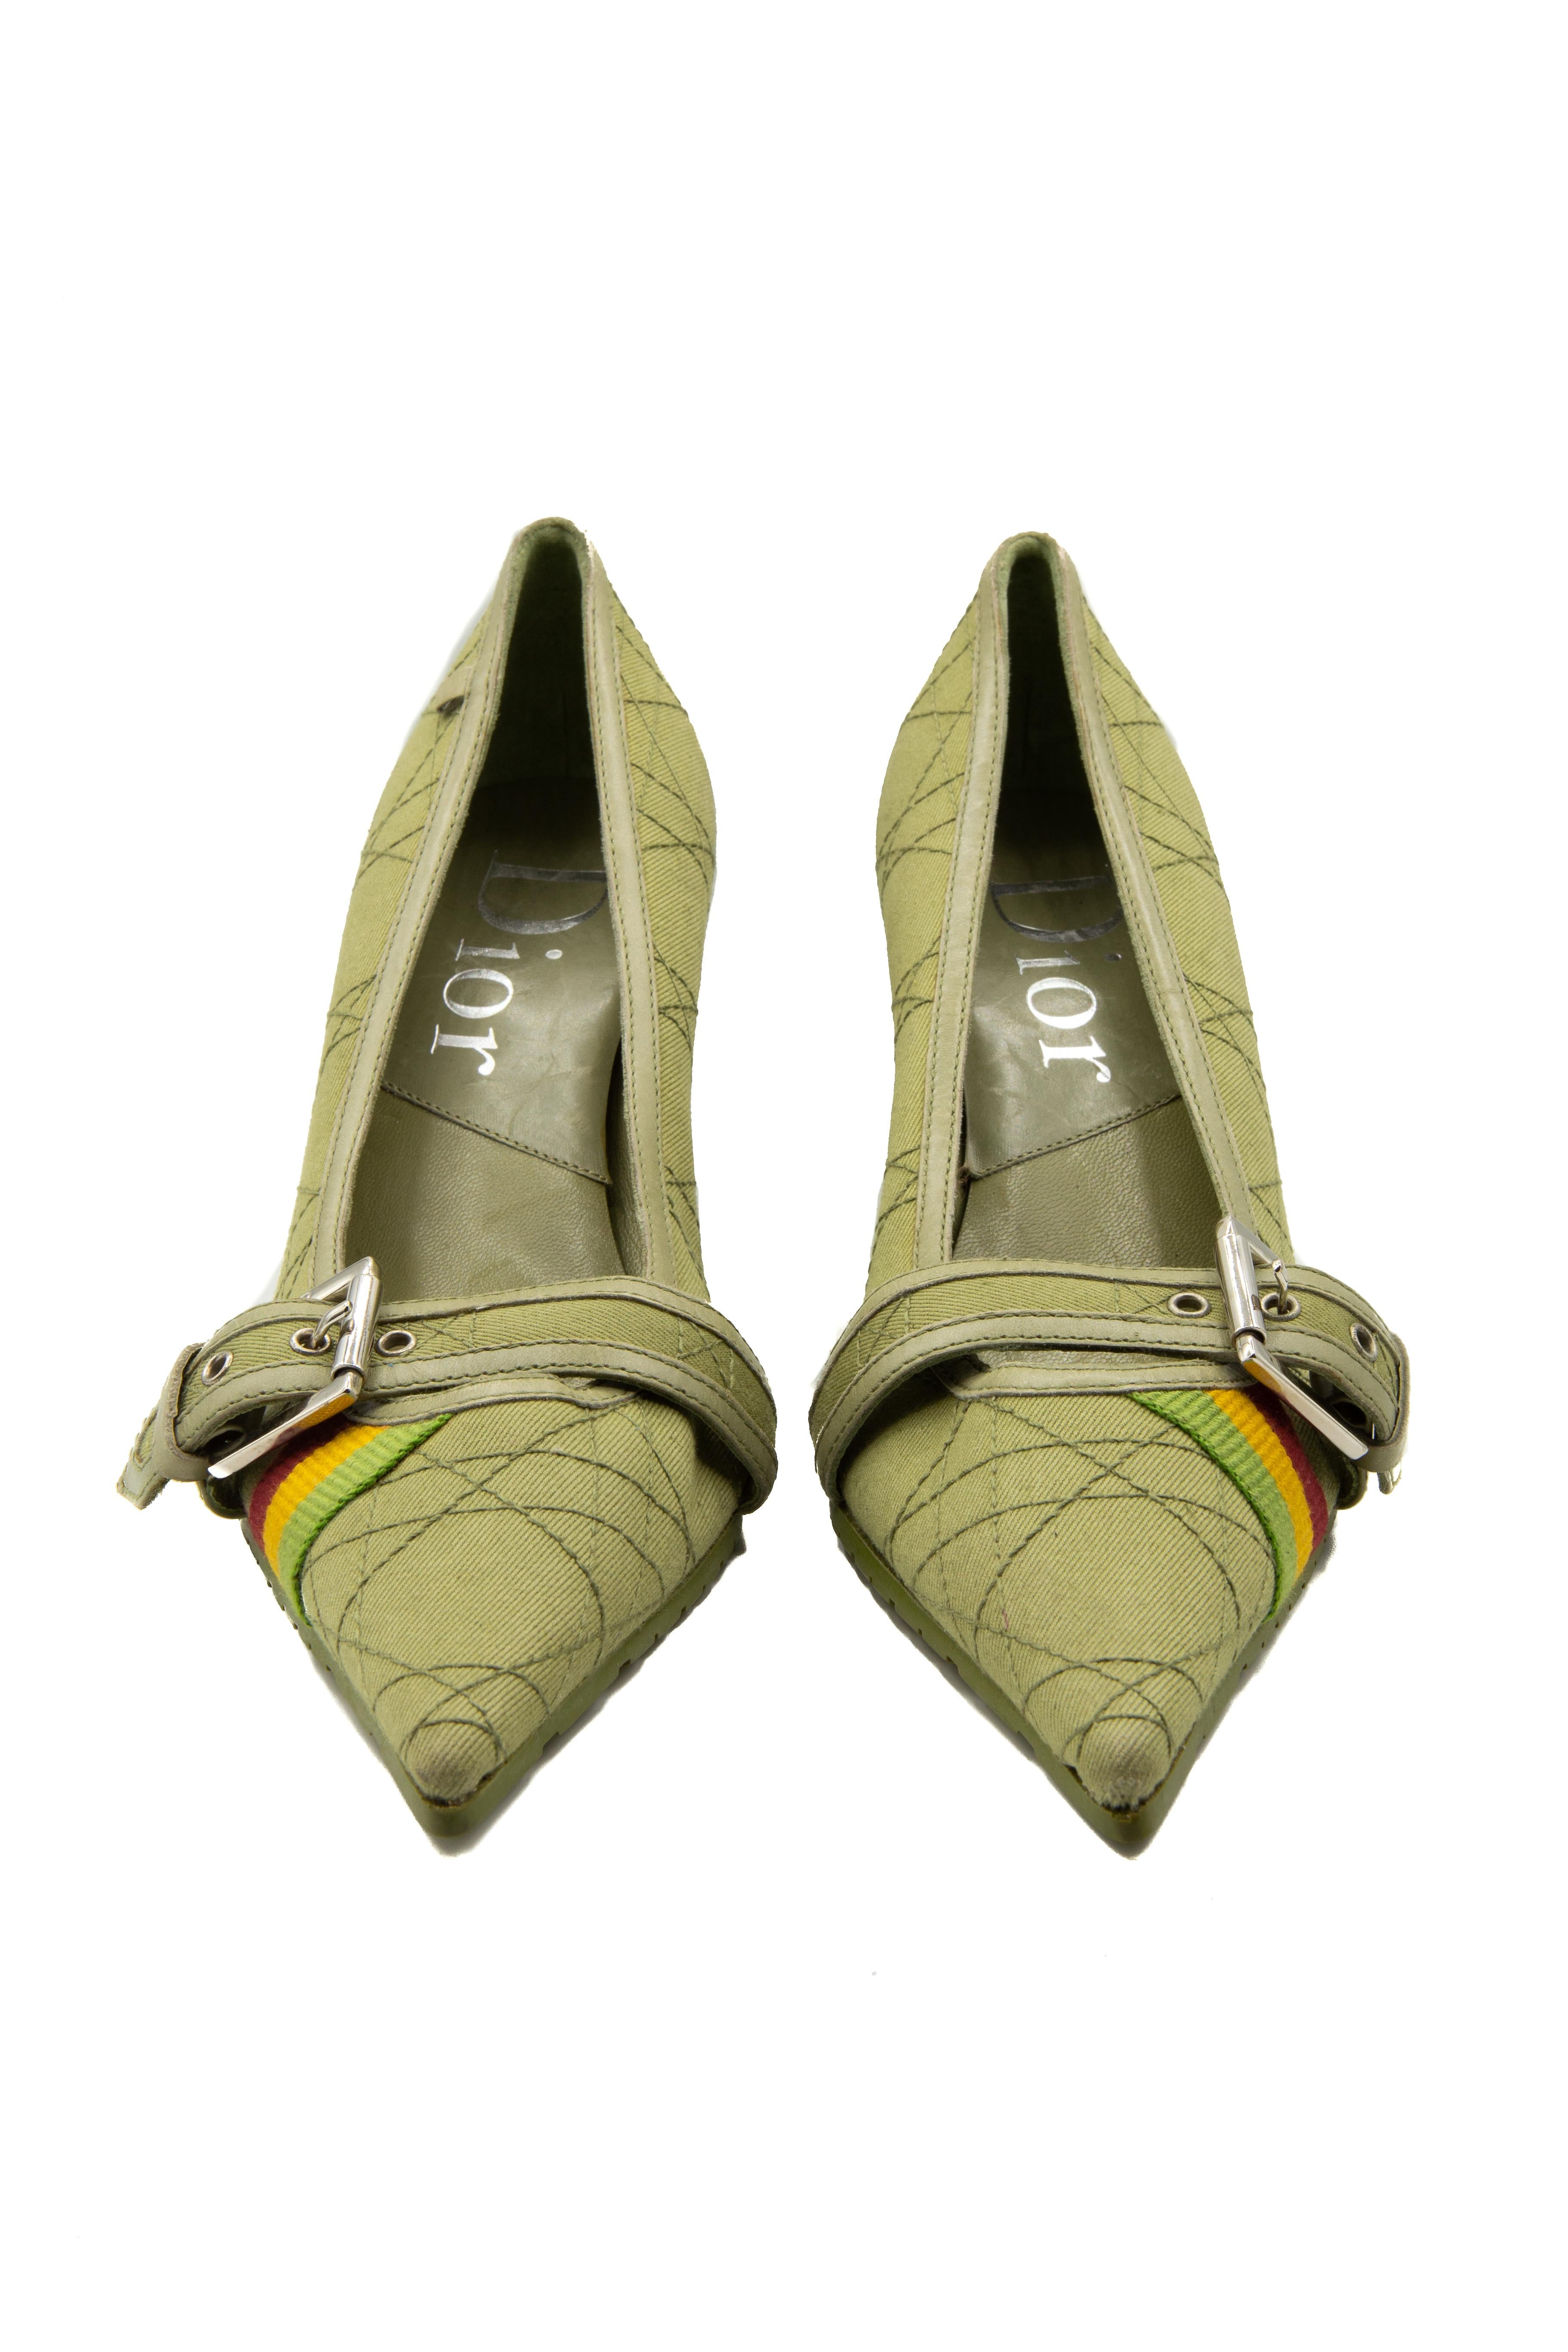 These Green canvas and leather quilted heels from Galliano Era Dior are from the 2004 RTW 'Rasta' collection. Features iconic Dior tread, Quilt stitching, buckle strap detail, tri-colour stripe trim and a kitten heel.

Size 36.5



